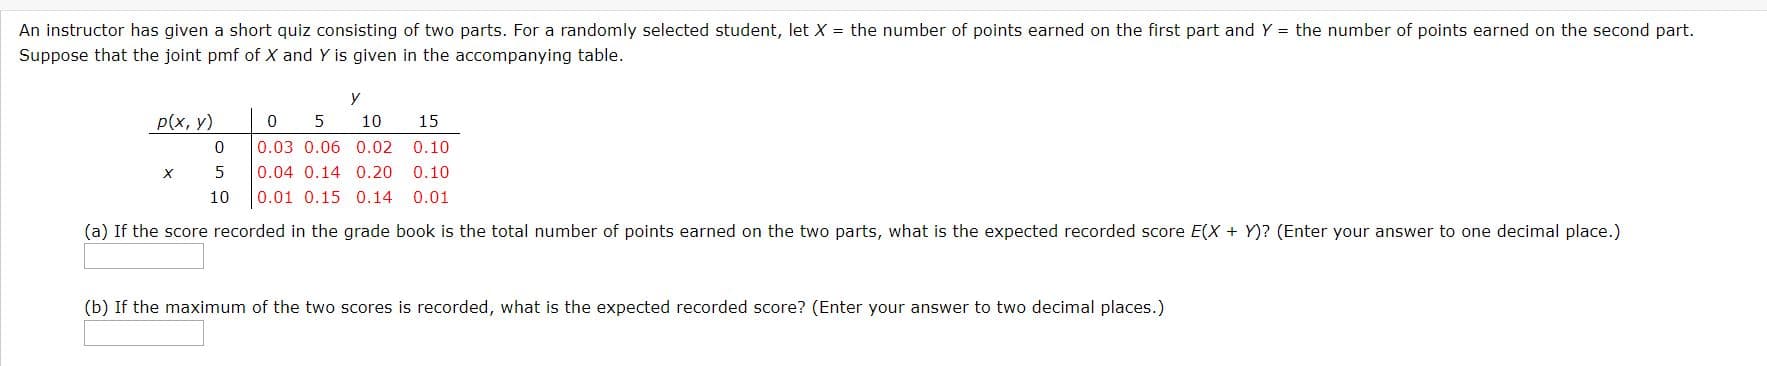 An instructor has given a short quiz consisting of two parts. For a randomly selected student, let X = the number of points earned on the first part and Y = the number of points earned on the second part.
Suppose that the joint pmf of X and Y is given in the accompanying table.
У
р(х, у)
10
15
0.03 0.06 0.02
0.04 0.14 0.20
0.01 0.15 0.14
0.10
0.10
10
0.01
(a) If the score recorded in the grade book is the total number of points earned on the two parts, what is the expected recorded score E(X + Y)? (Enter your answer to one decimal place.)
(b) If the maximum of the two scores is recorded, what is the expected recorded score? (Enter your answer to two decimal places.)
